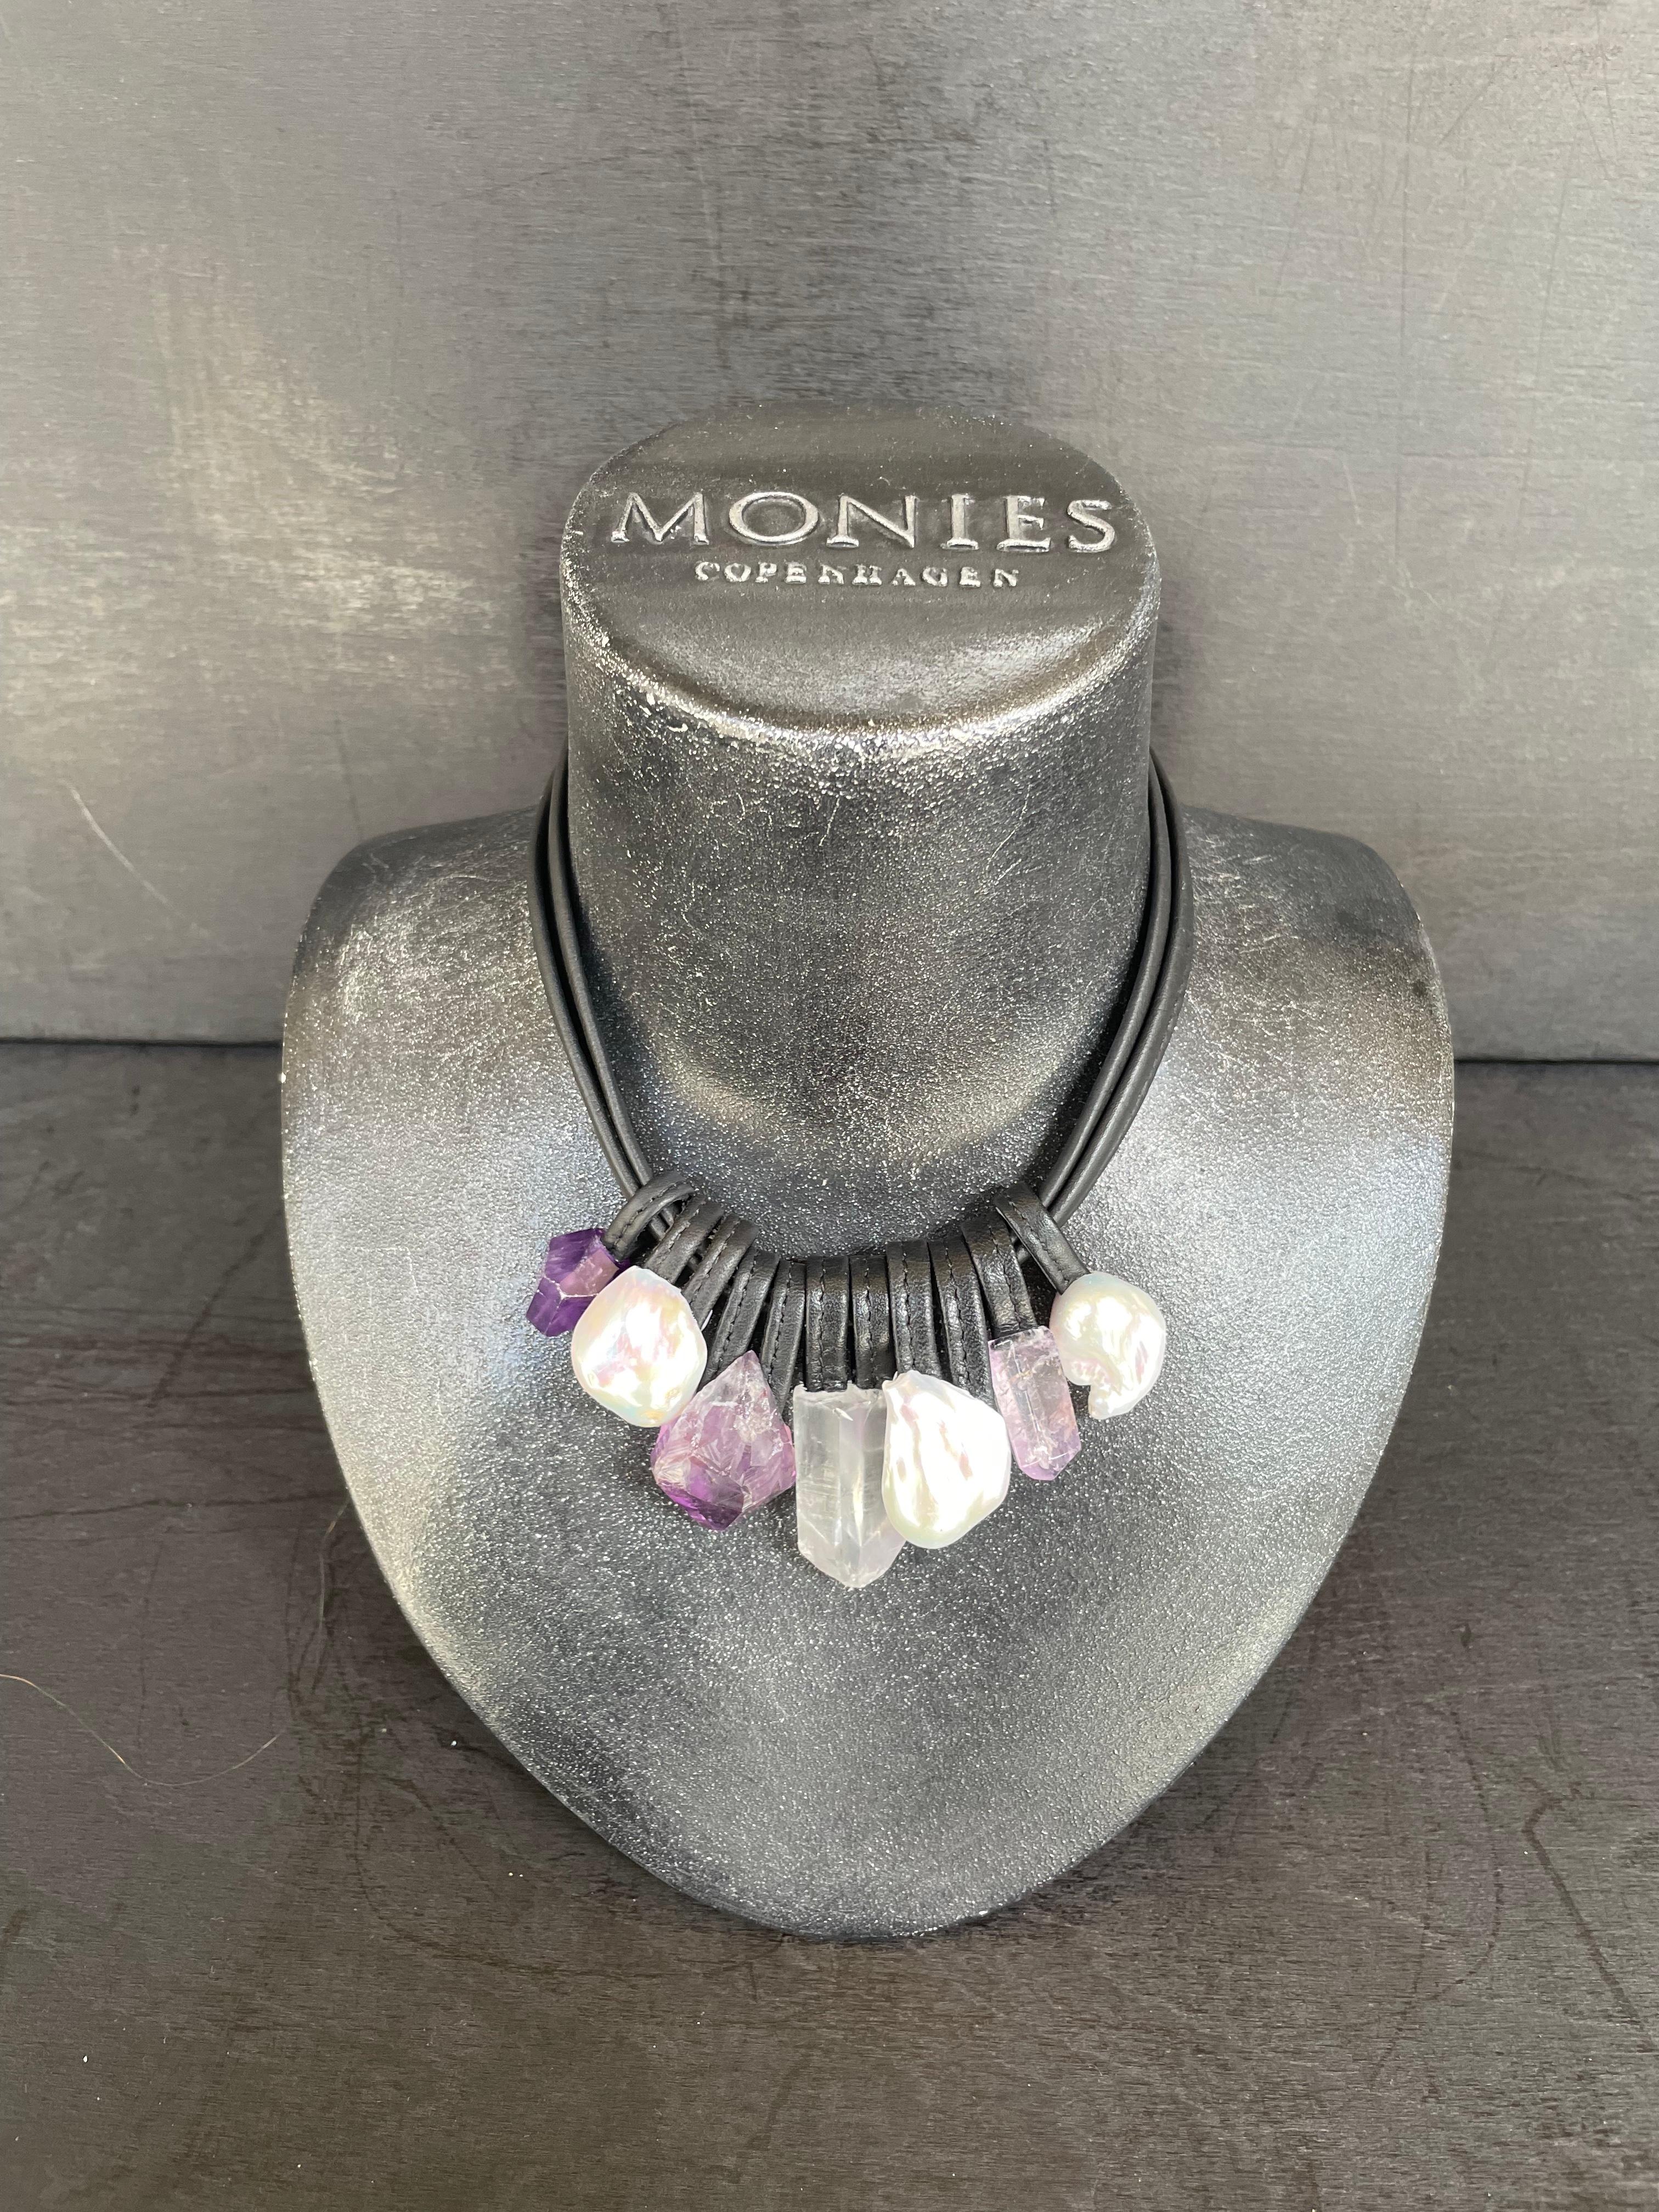 One-of-a-kind statement necklace from the Danish jewellery brand, Monies.
Made in Amethyst, Baroque Pearl, Mountain Crystal and Leather with a leather clasp.

Handcrafted in the Monies Atelier in Copenhagen.